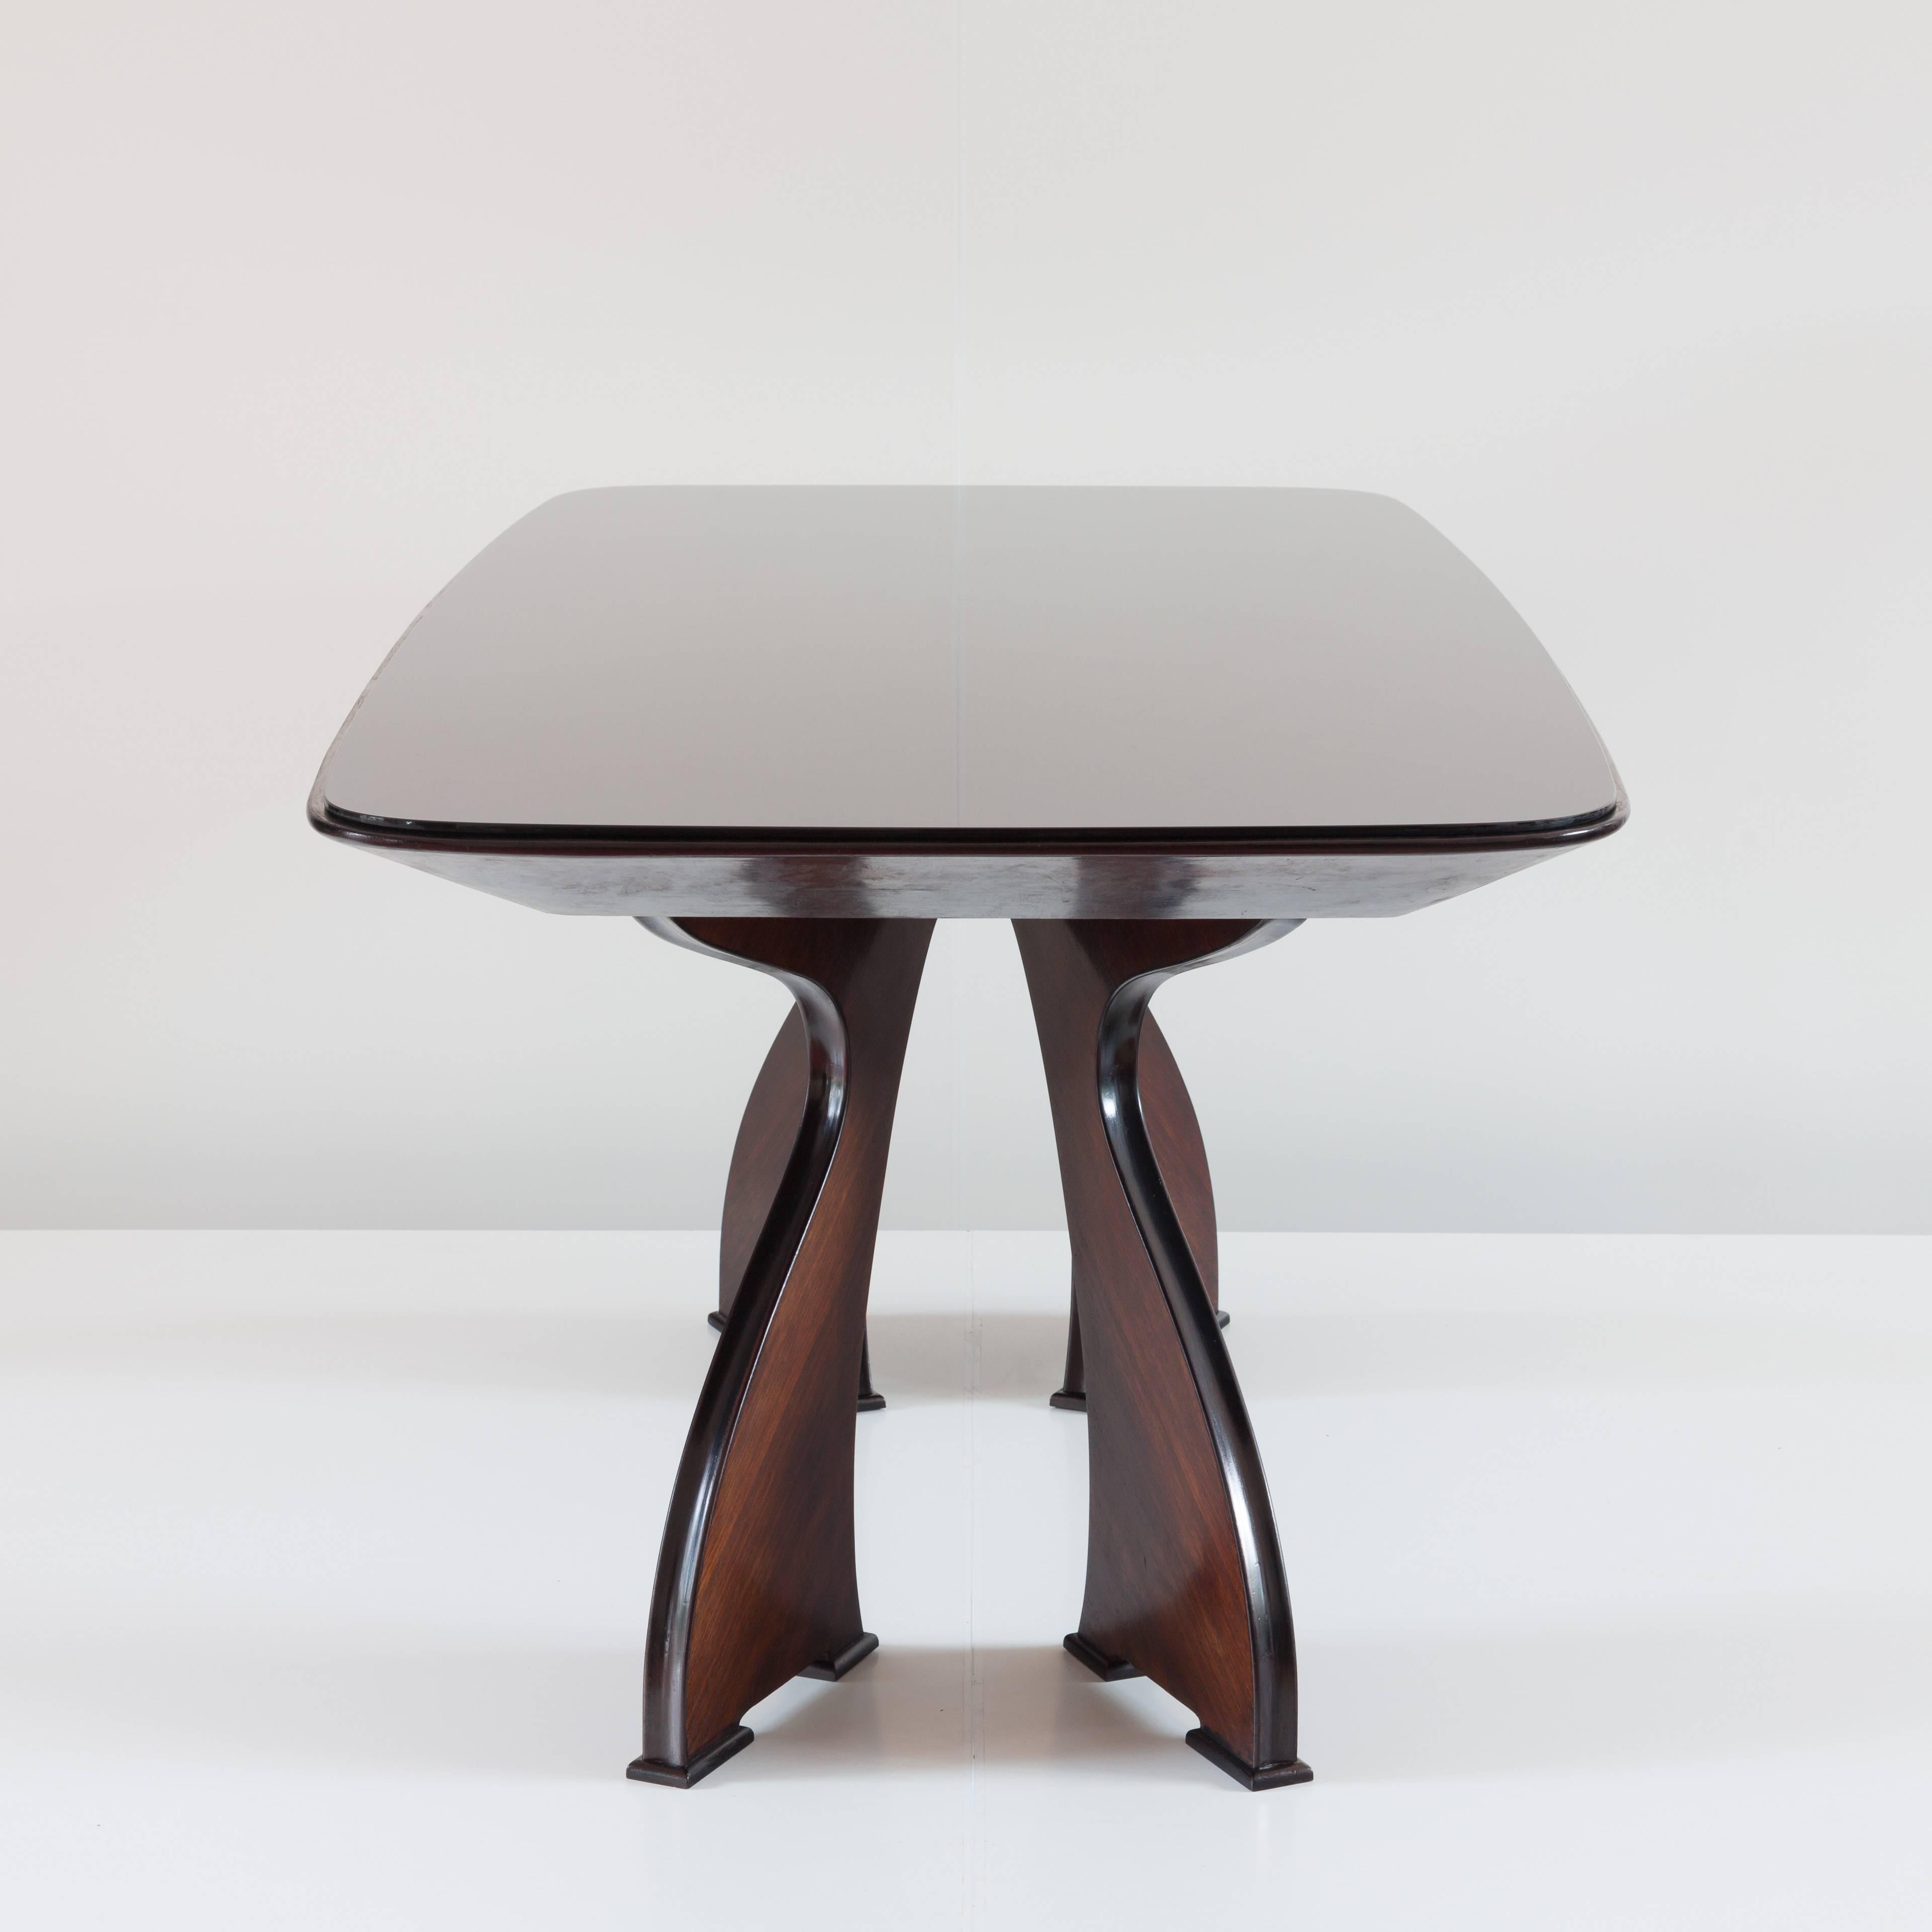 Mid-20th Century Stunning Italian Modern Rosewood and Black Opaline Glass Dining Table